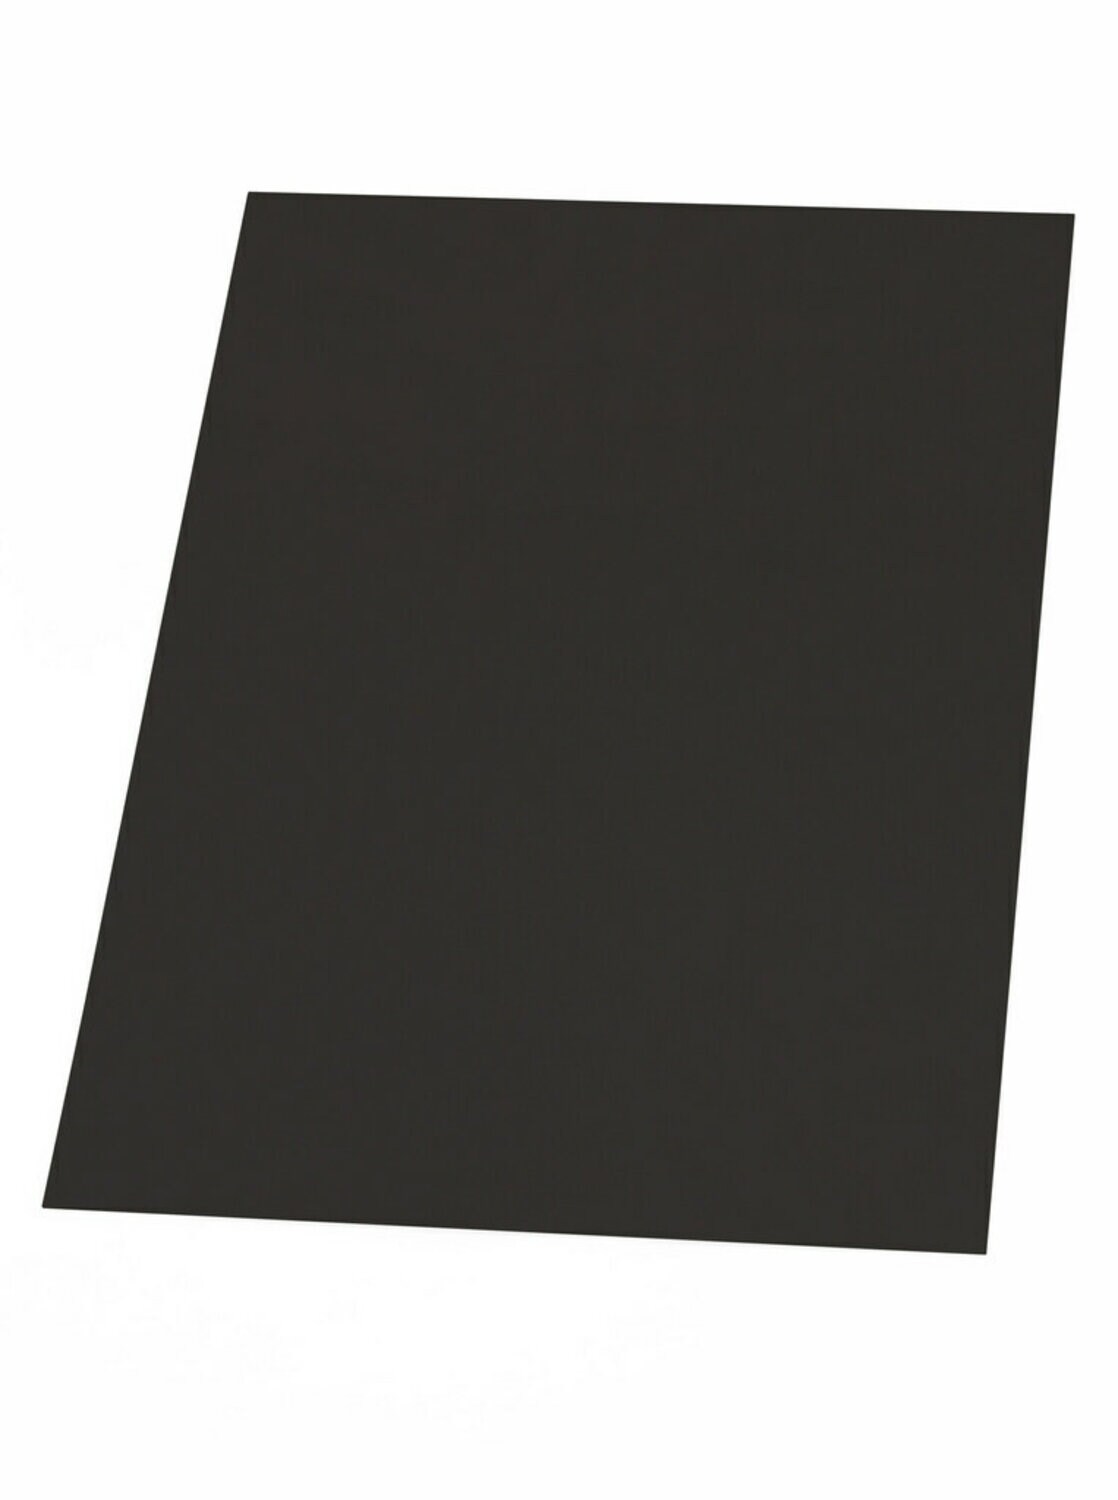 7010305060 - 3M Thermally Conductive Interface Pad Sheet 5595S, 210 mm x 300 mm 1.0
mm, 40/Case